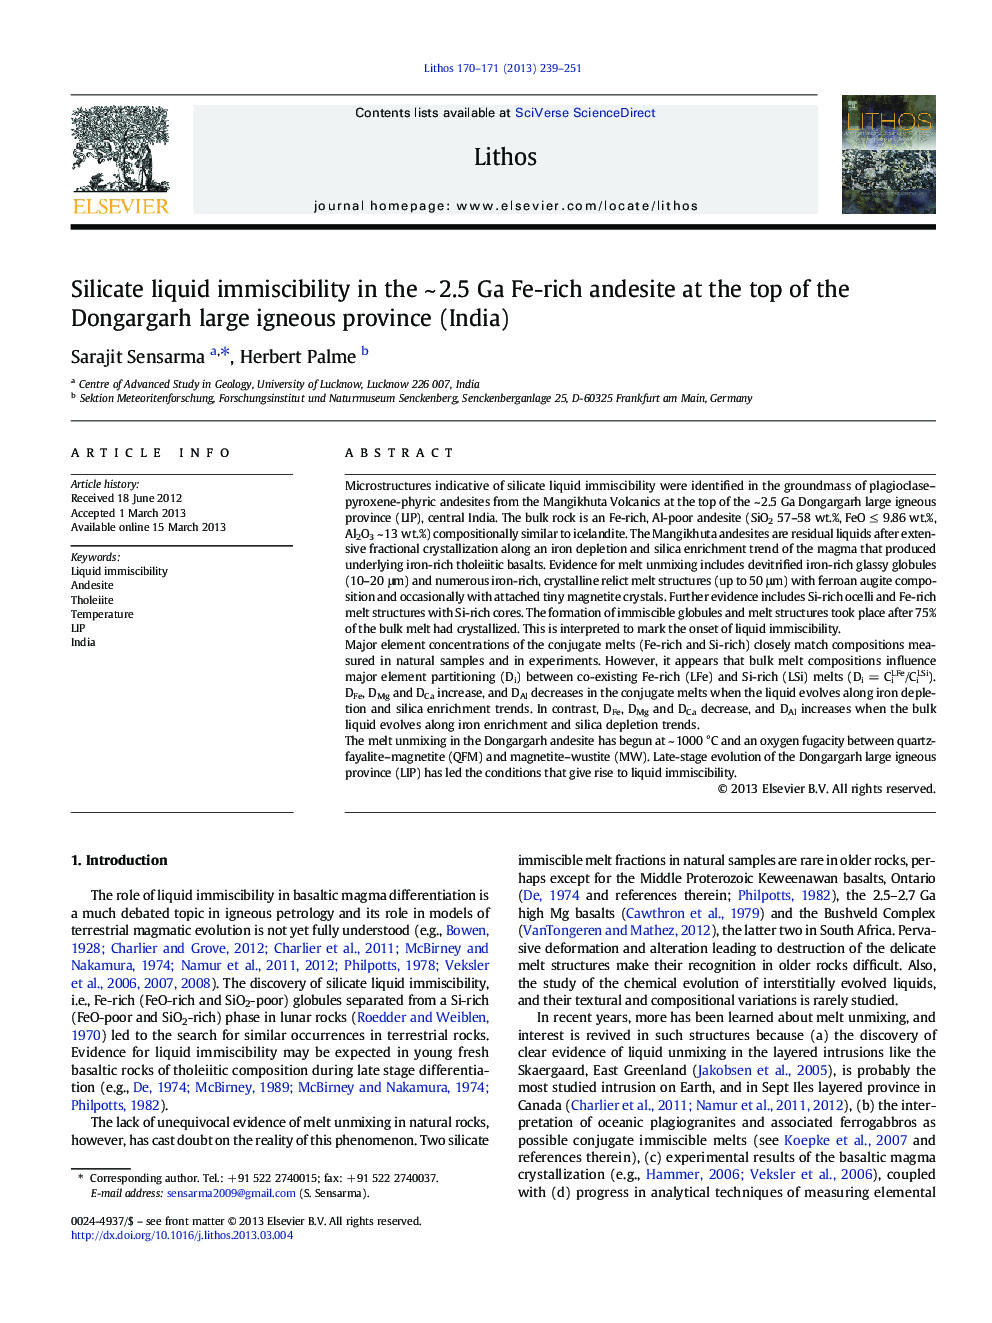 Silicate liquid immiscibility in the ~ 2.5 Ga Fe-rich andesite at the top of the Dongargarh large igneous province (India)